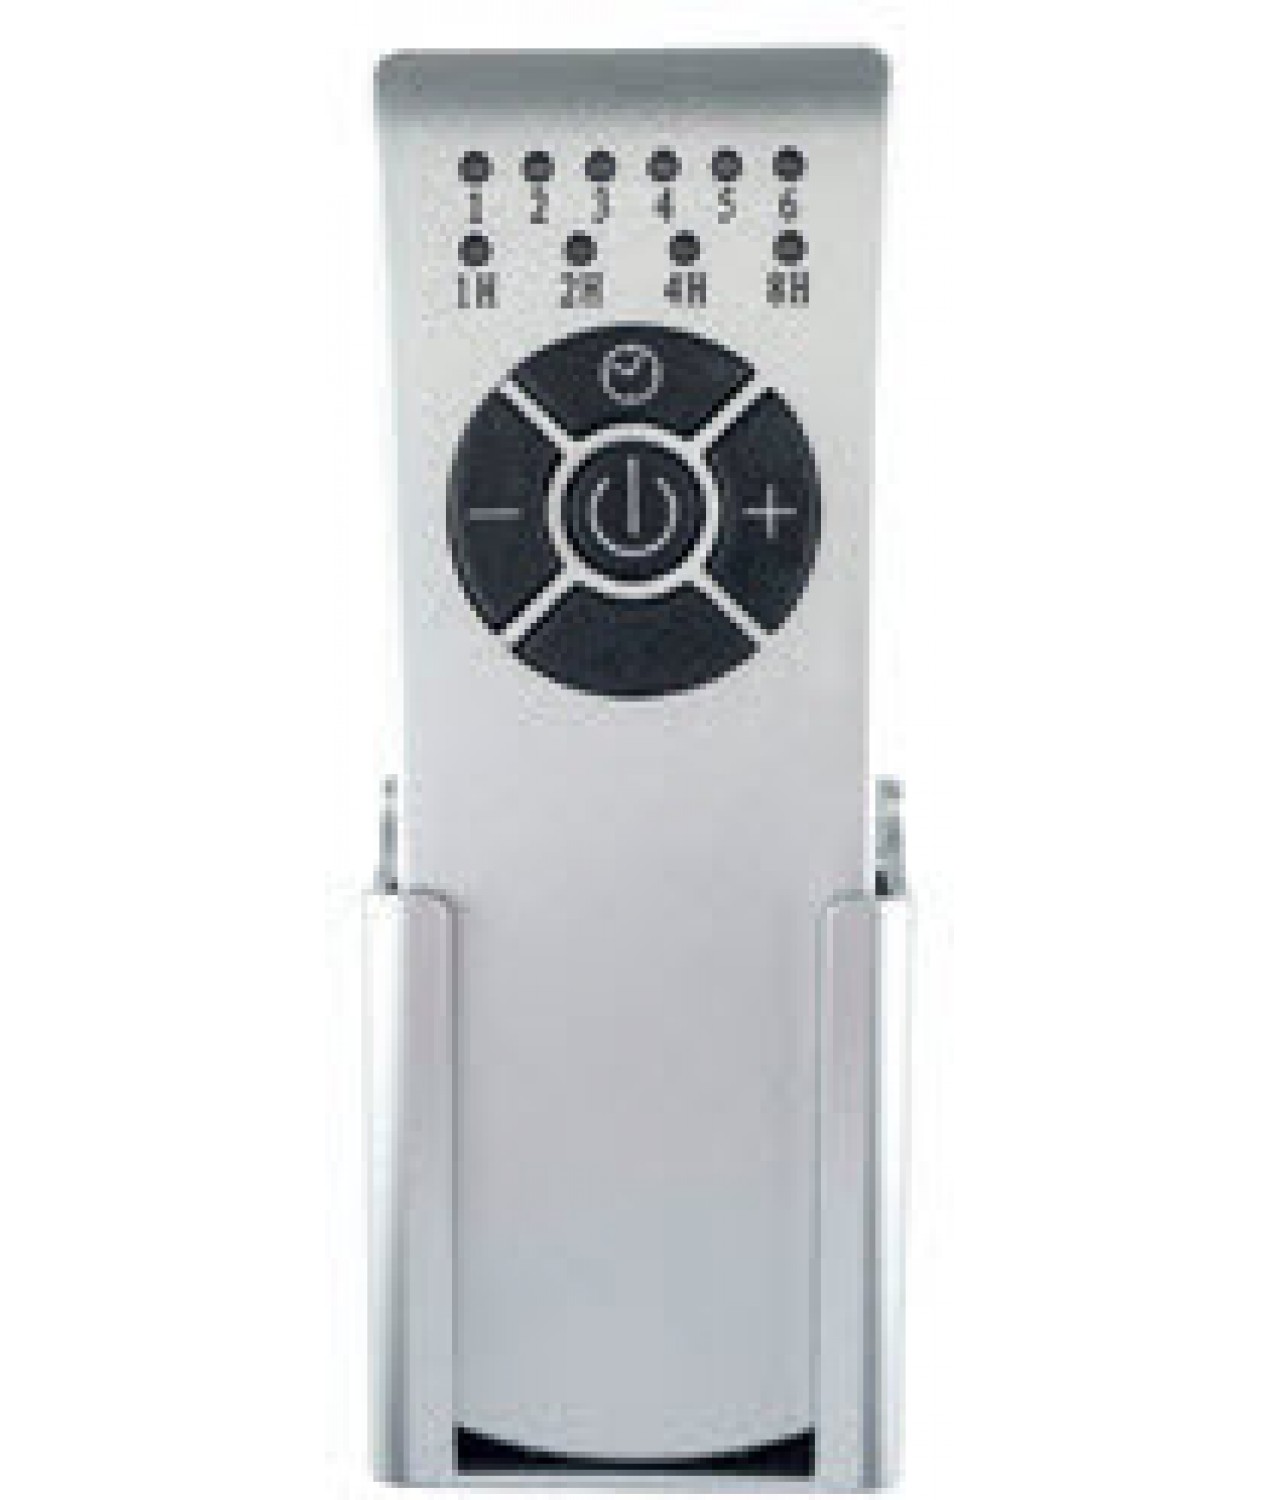 HTB fan remote control - included